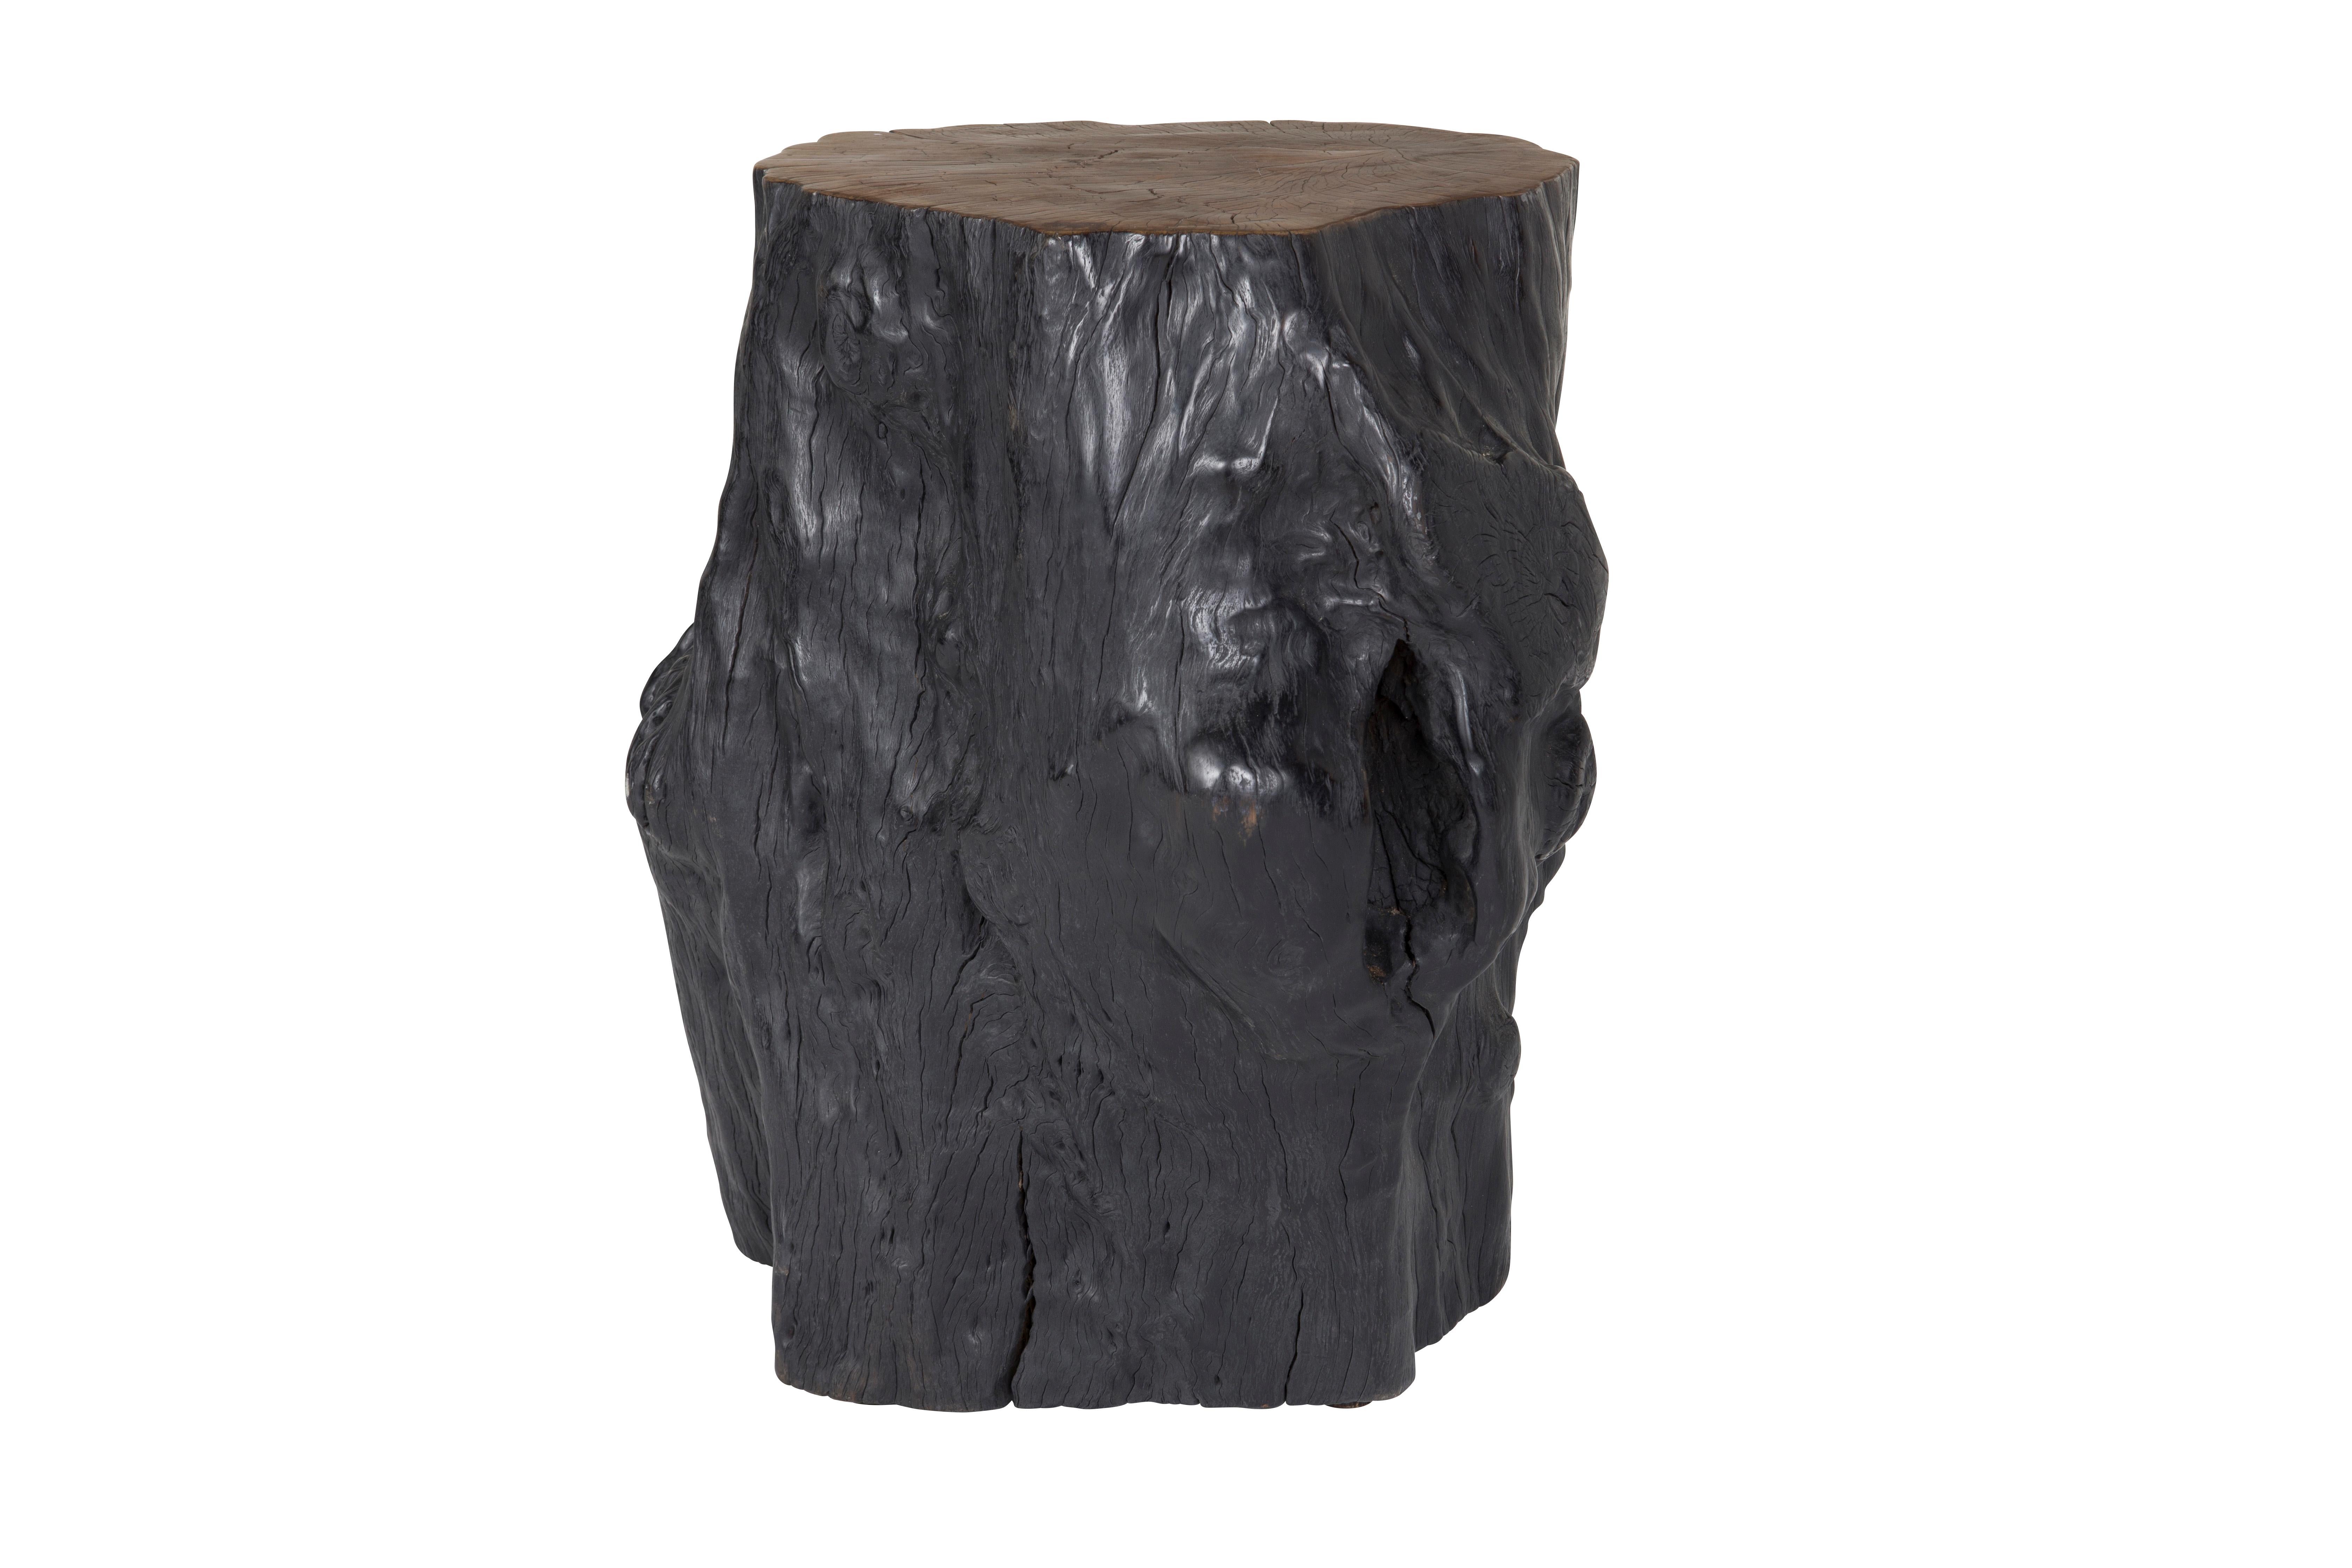 Free-formed organic-shaped lychee wood stump end table. Featuring an ebony-stained body and a warm finished accent top. This hand-carved piece has a smooth top but a natural edge respecting the beautiful grain of the hardwood it comes from.

Our